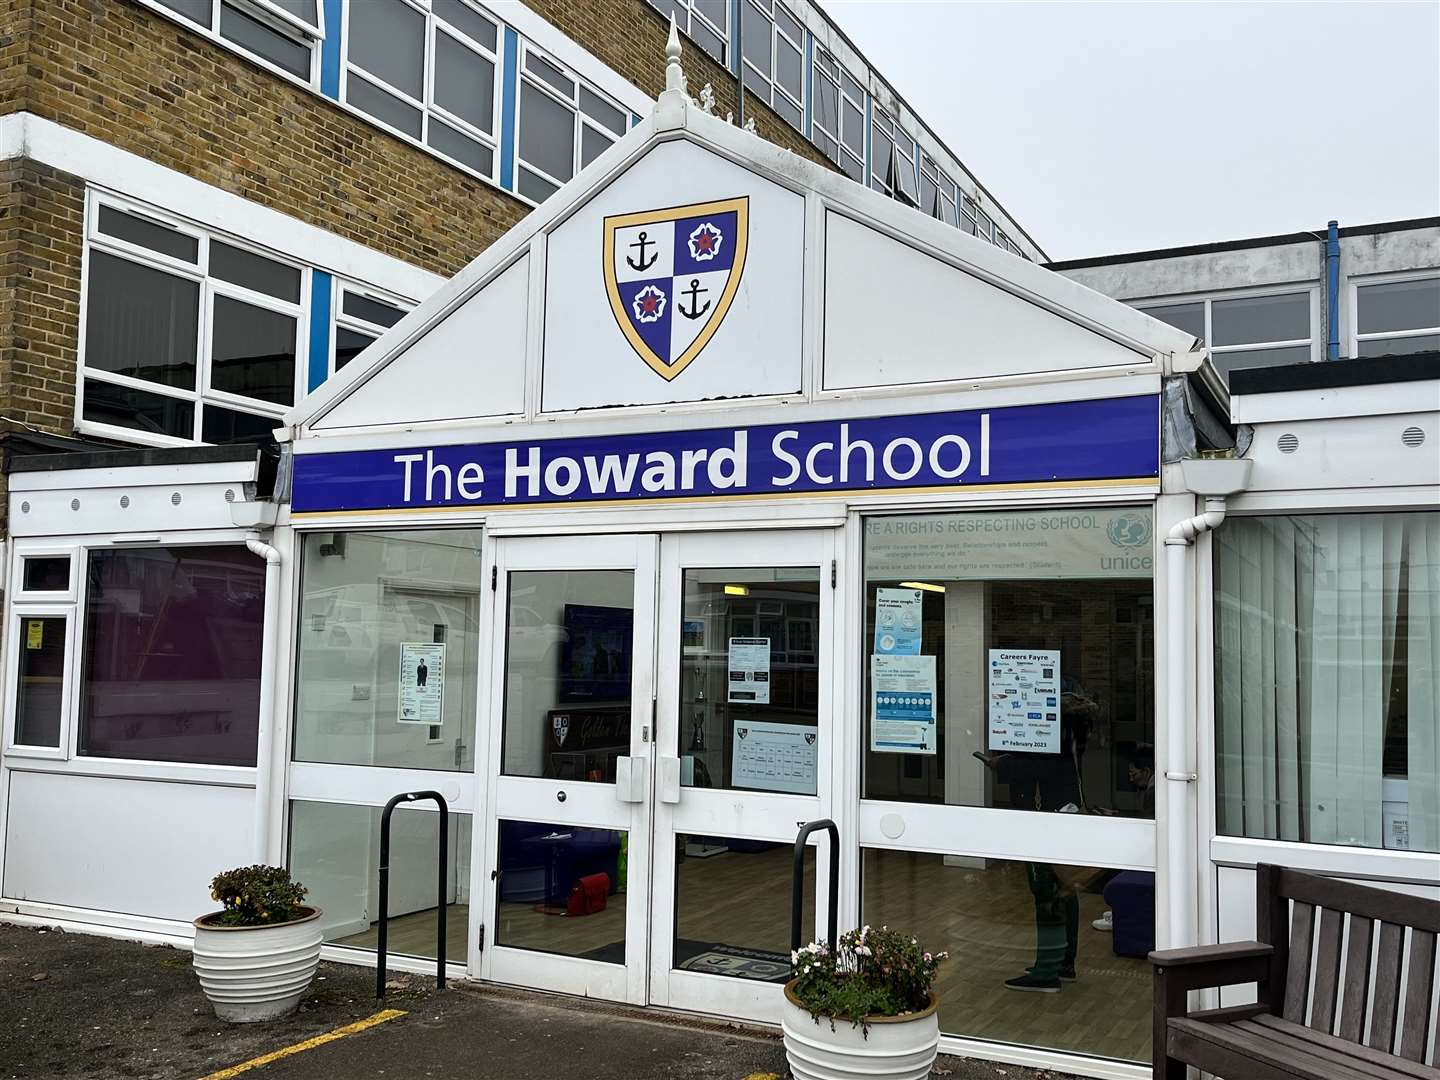 The teenagers all attend The Howard School